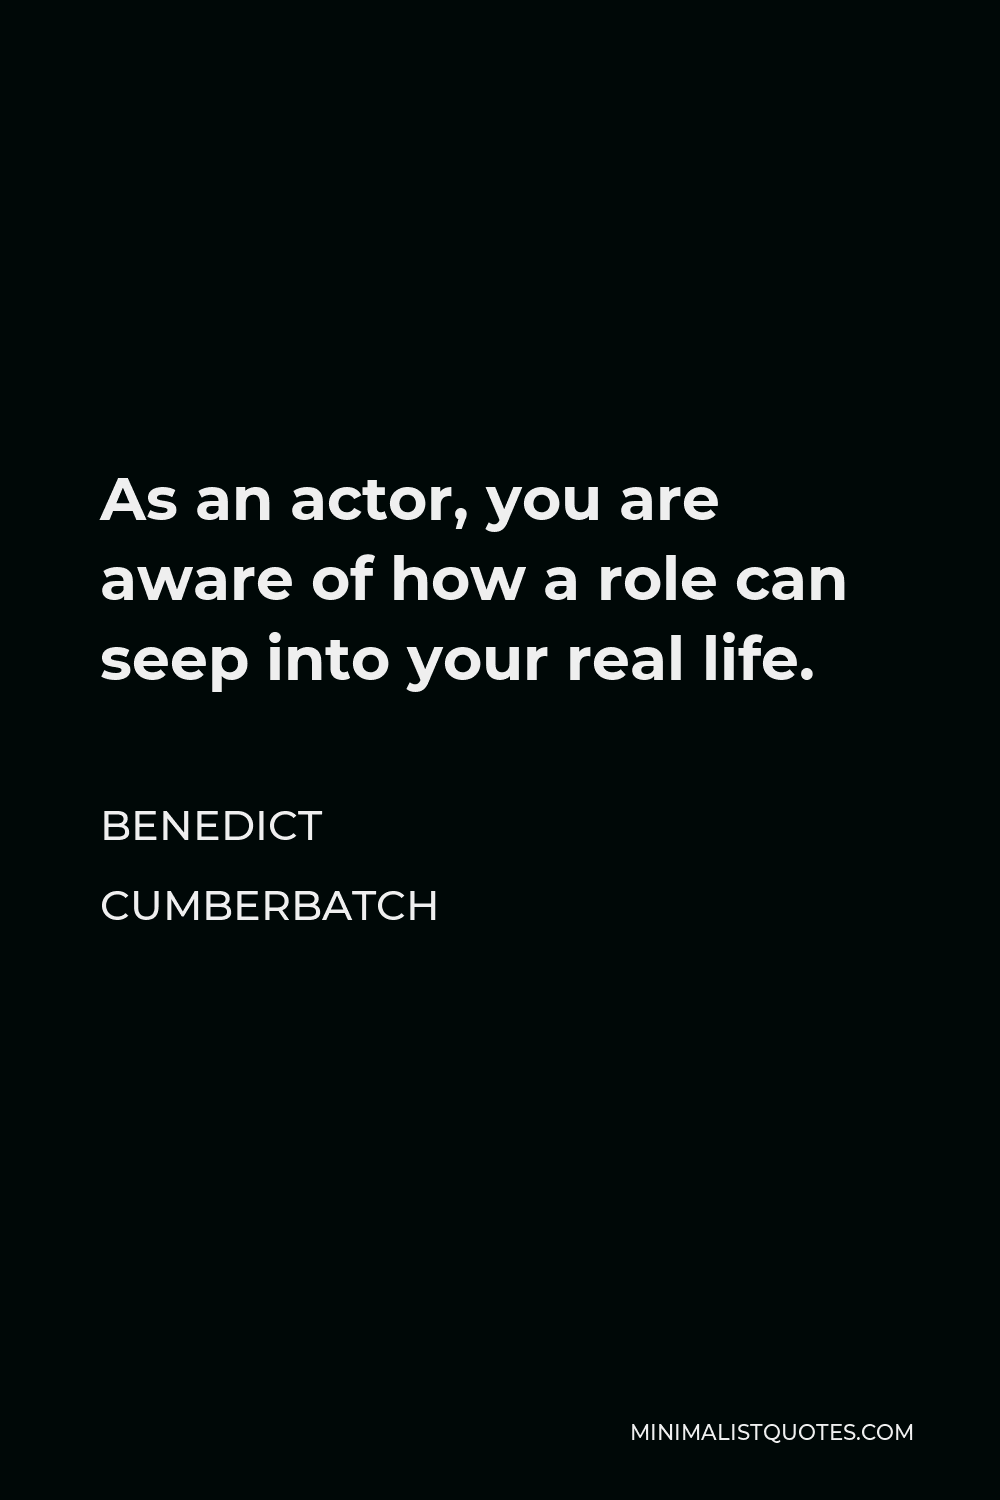 Benedict Cumberbatch Quote - As an actor, you are aware of how a role can seep into your real life.